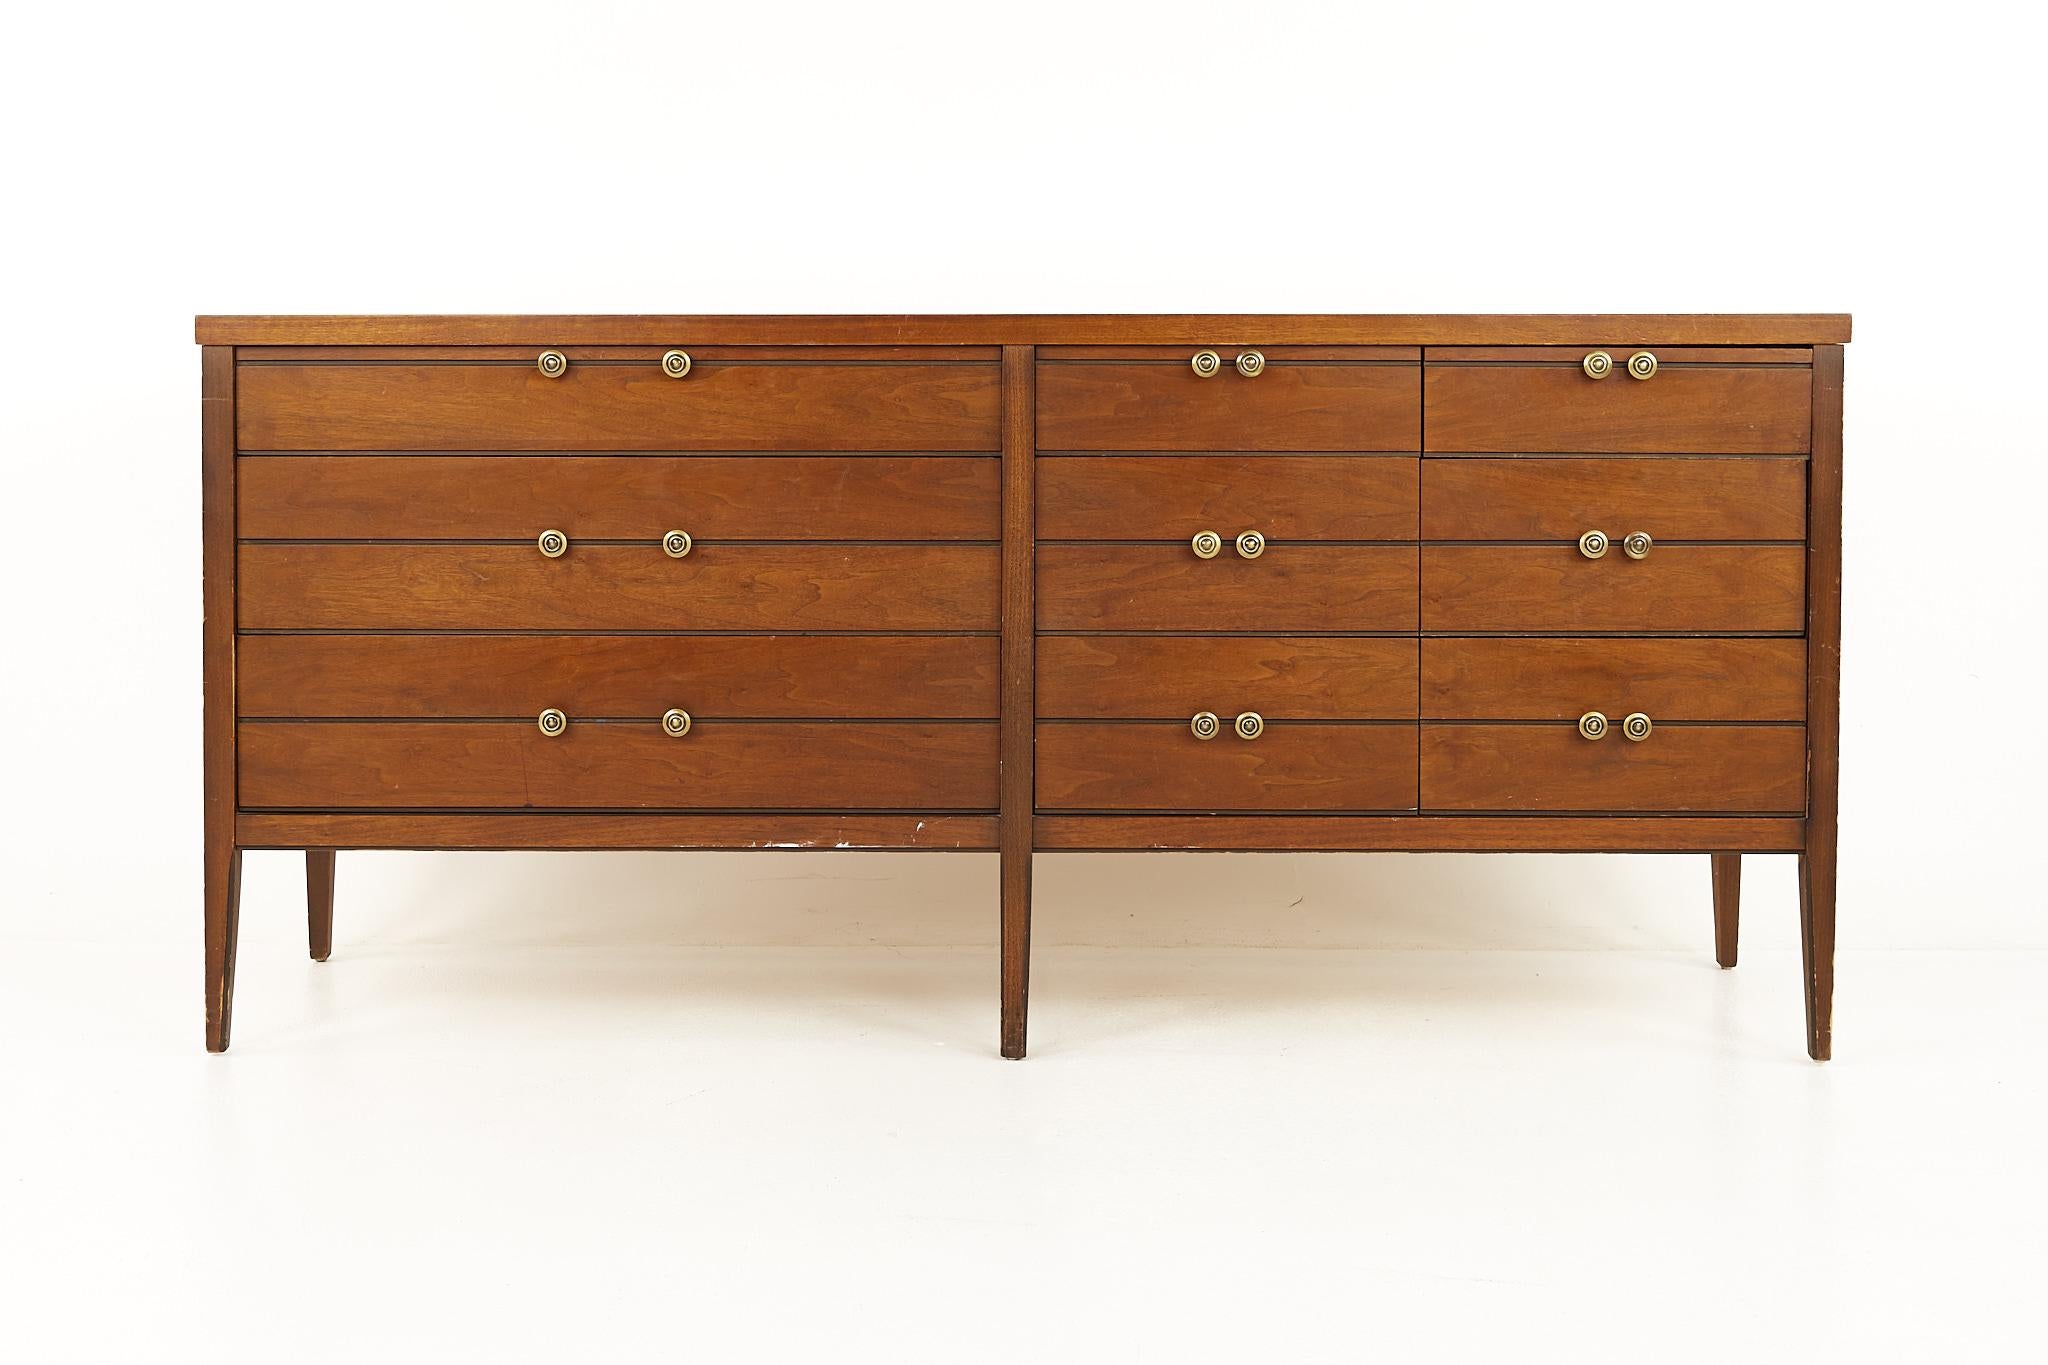 Lane Mid century walnut tuxedo bow tie sideboard credenza

This credenza measures: 66.25 wide x 18.25 deep x 30.25 inches high

All pieces of furniture can be had in what we call restored vintage condition. That means the piece is restored upon